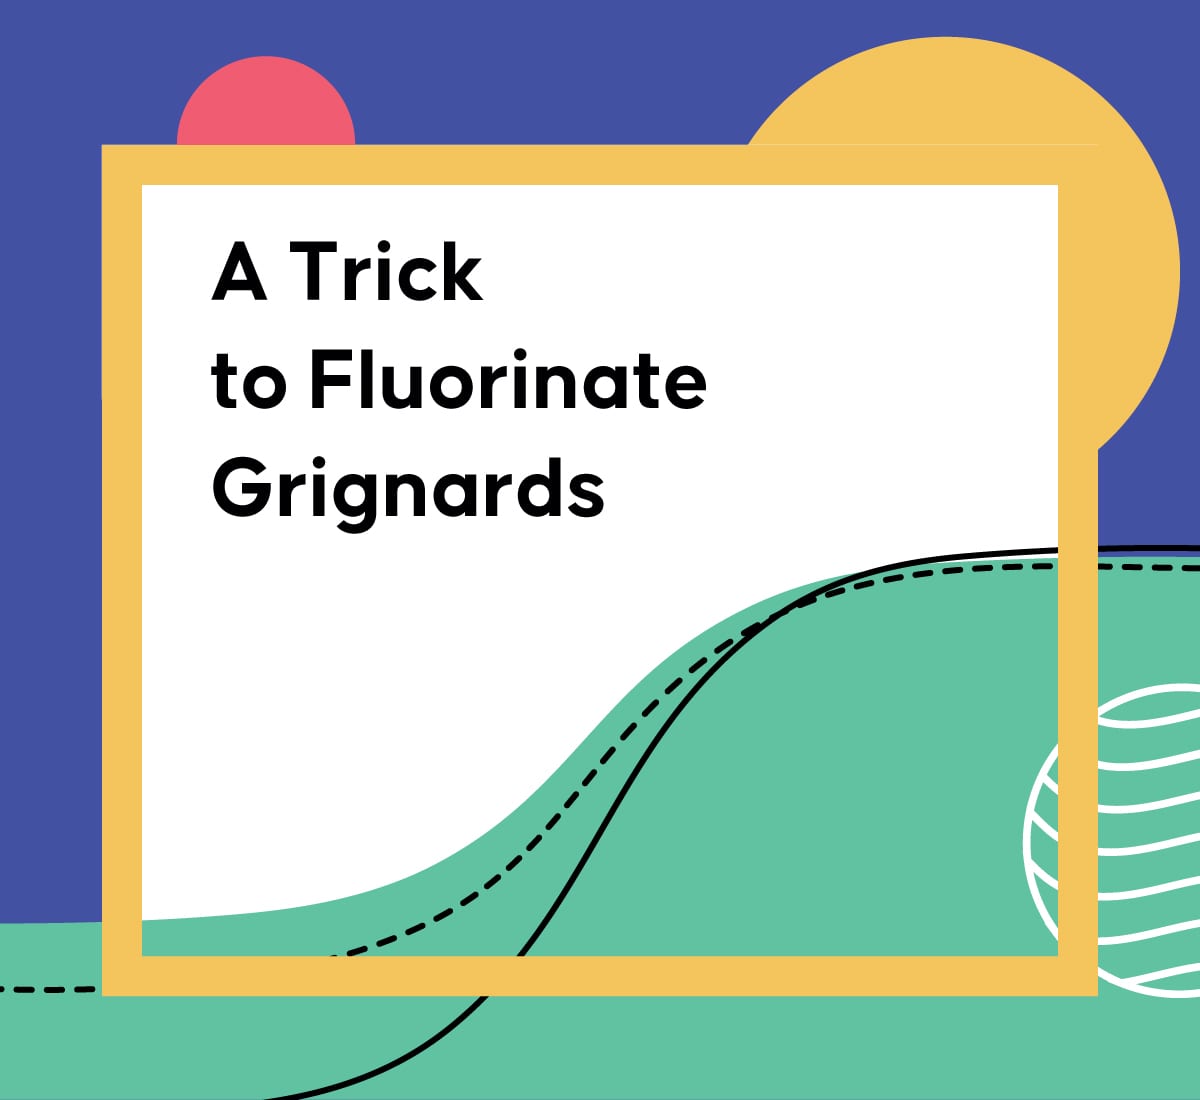 Cover image of Drug Hunter article "A Trick to Fluorinate Grignards"